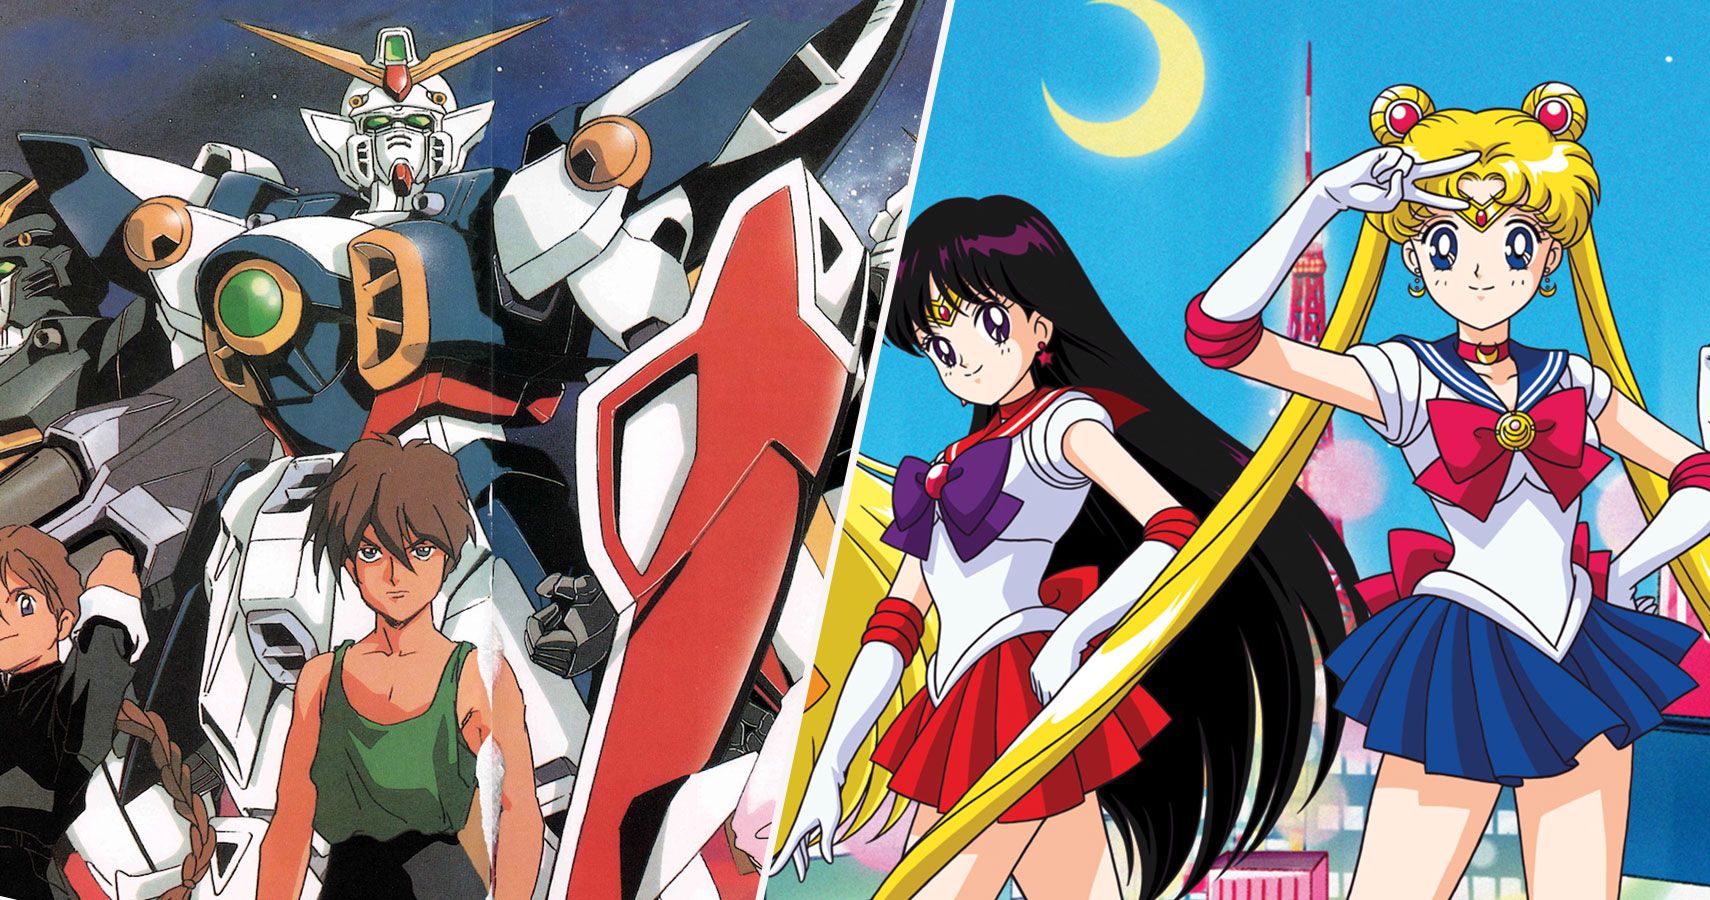 The 15 Most Overrated Anime Shows Ever (And 10 That Always Get Overlooked)